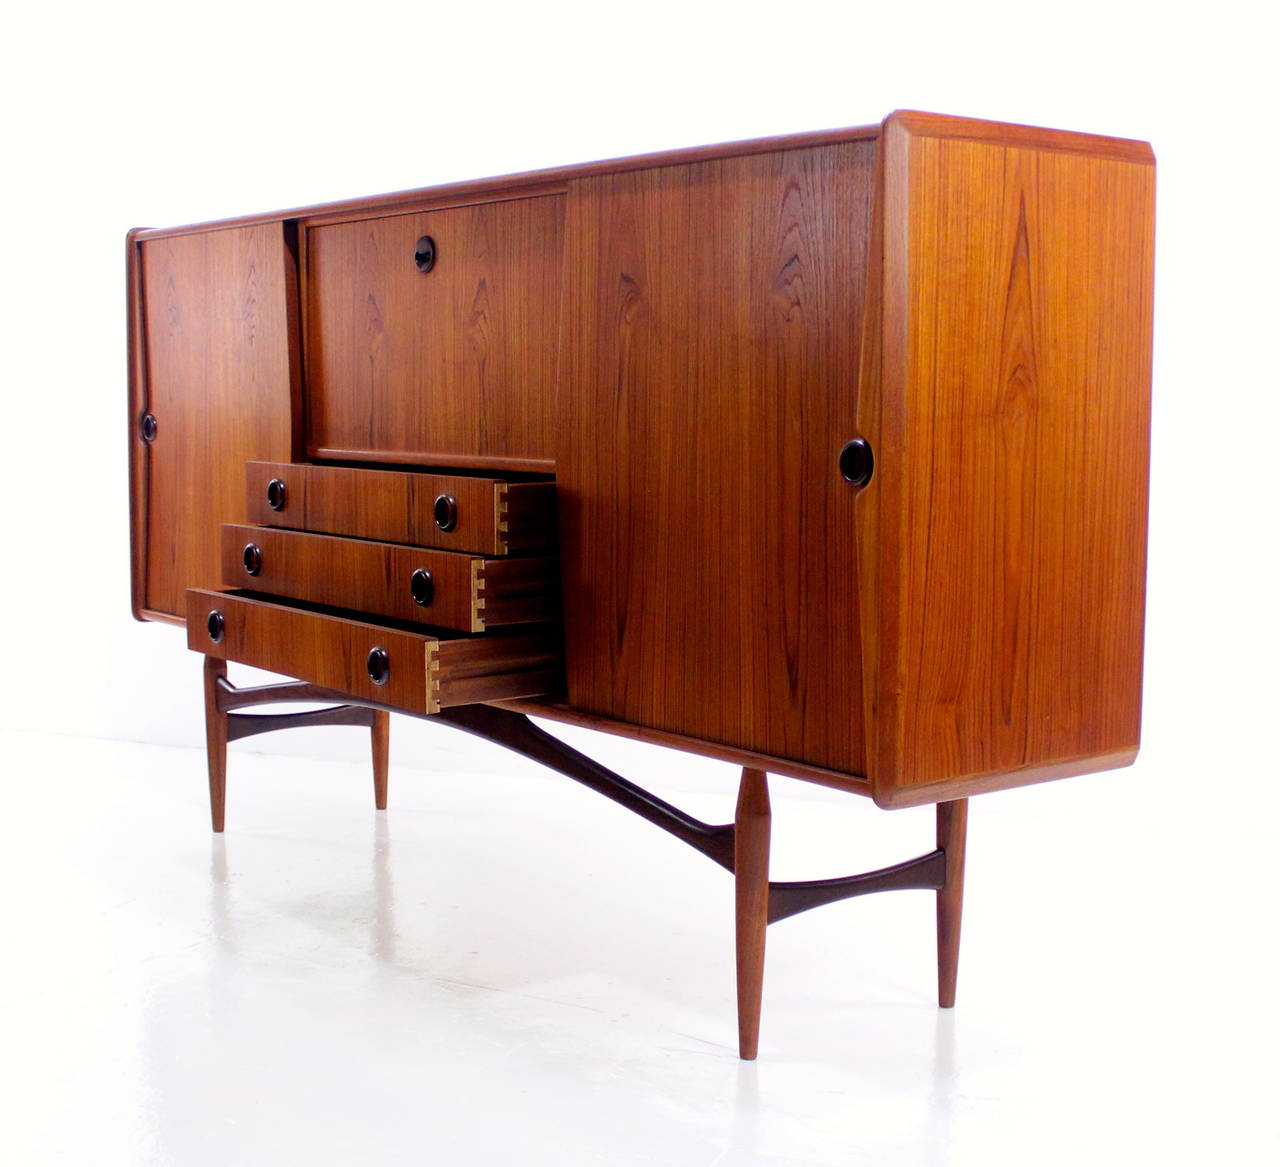 Exceptional Danish Modern Teak Credenza with Dazzling Detailing In Excellent Condition For Sale In Portland, OR